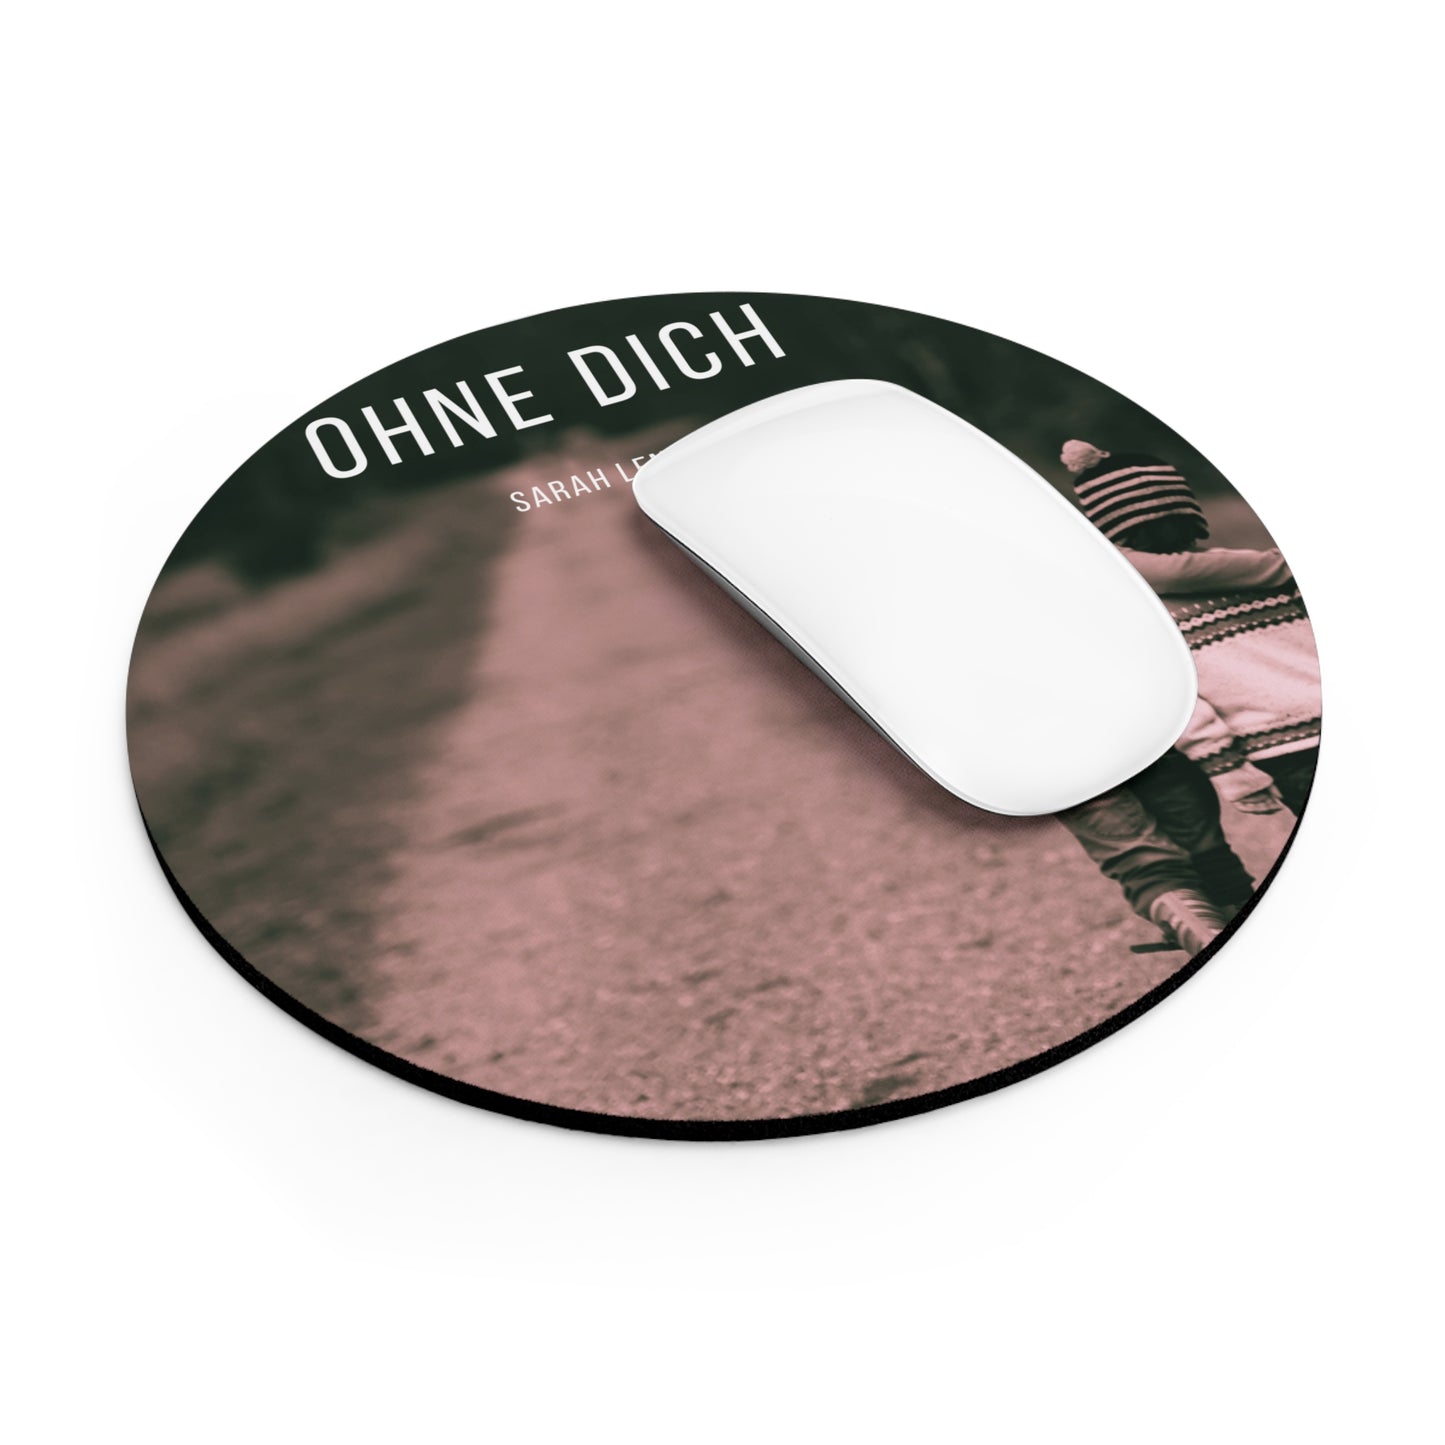 Mouse Pad (Ohne dich)